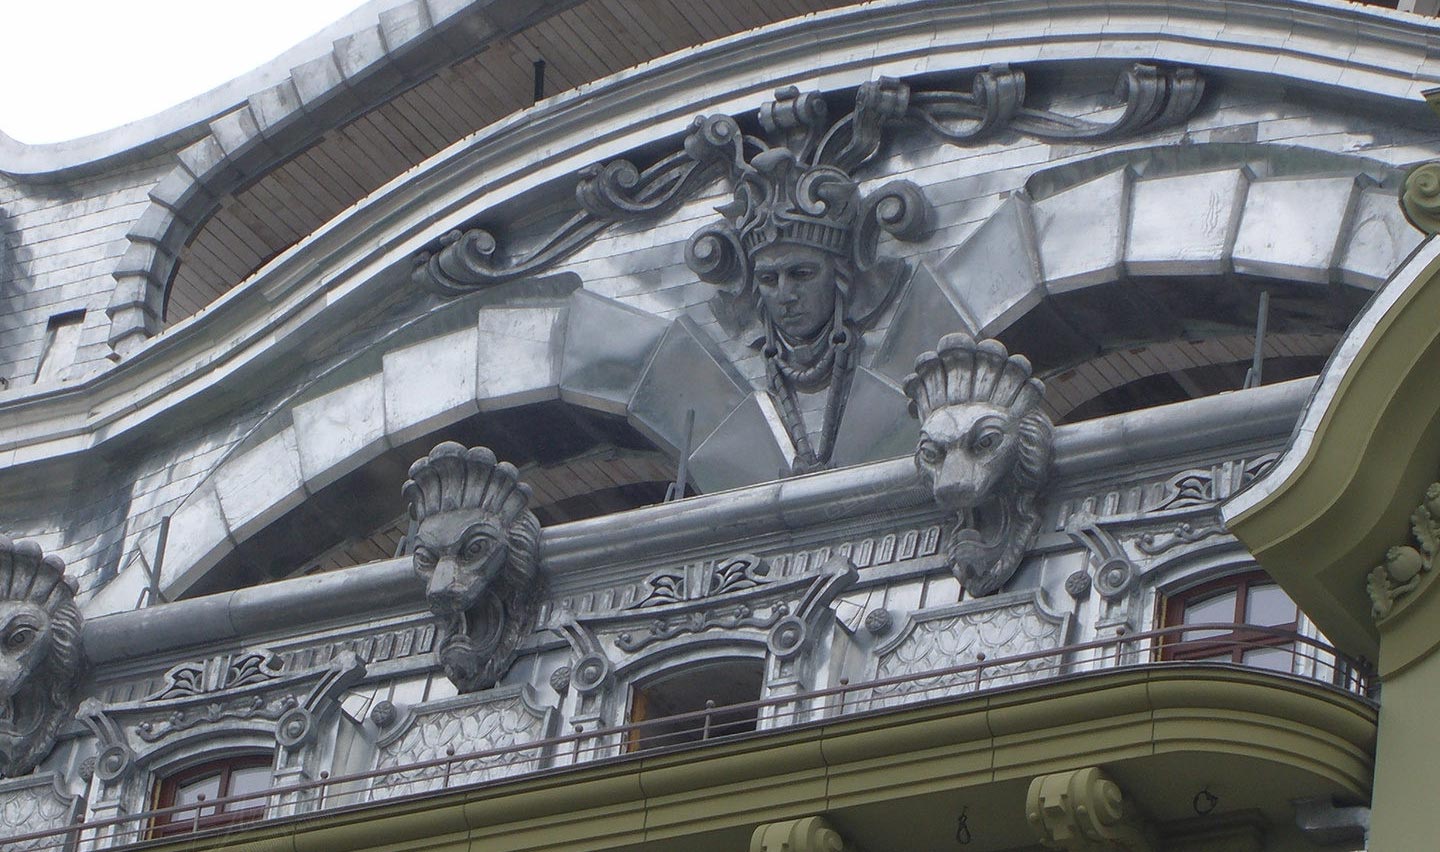 Mascarons and embossed metal decorations on the facade